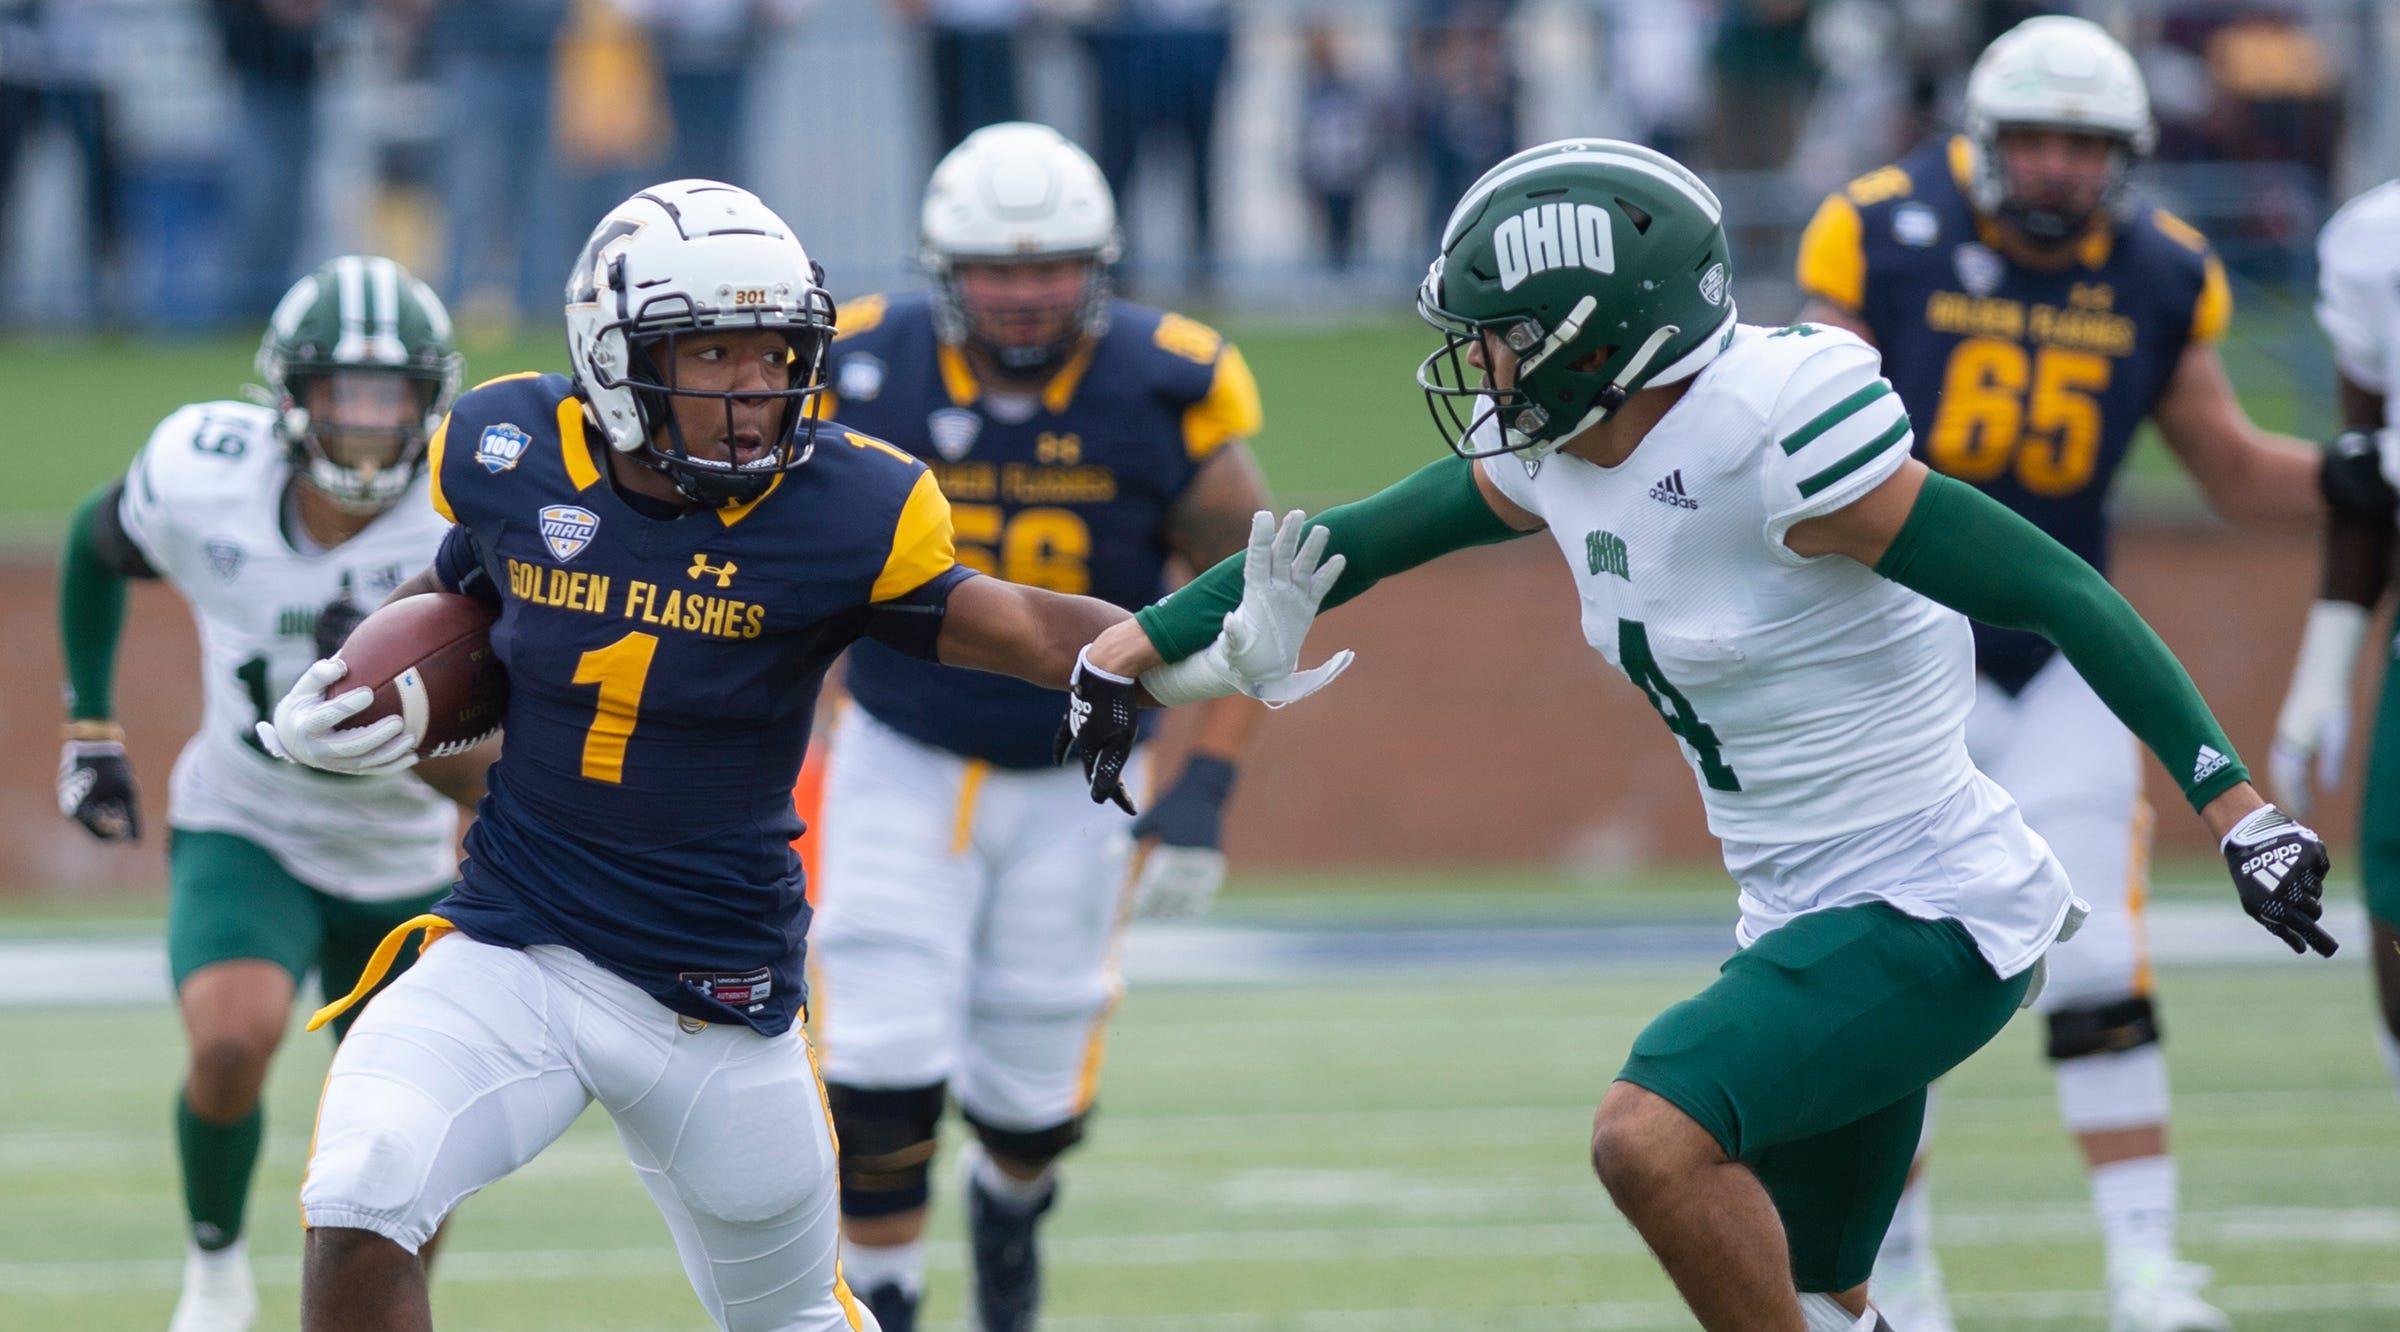 Kent State running back Marquez Cooper and receiver Dante Cephas made FBS history on Saturday against Ohio